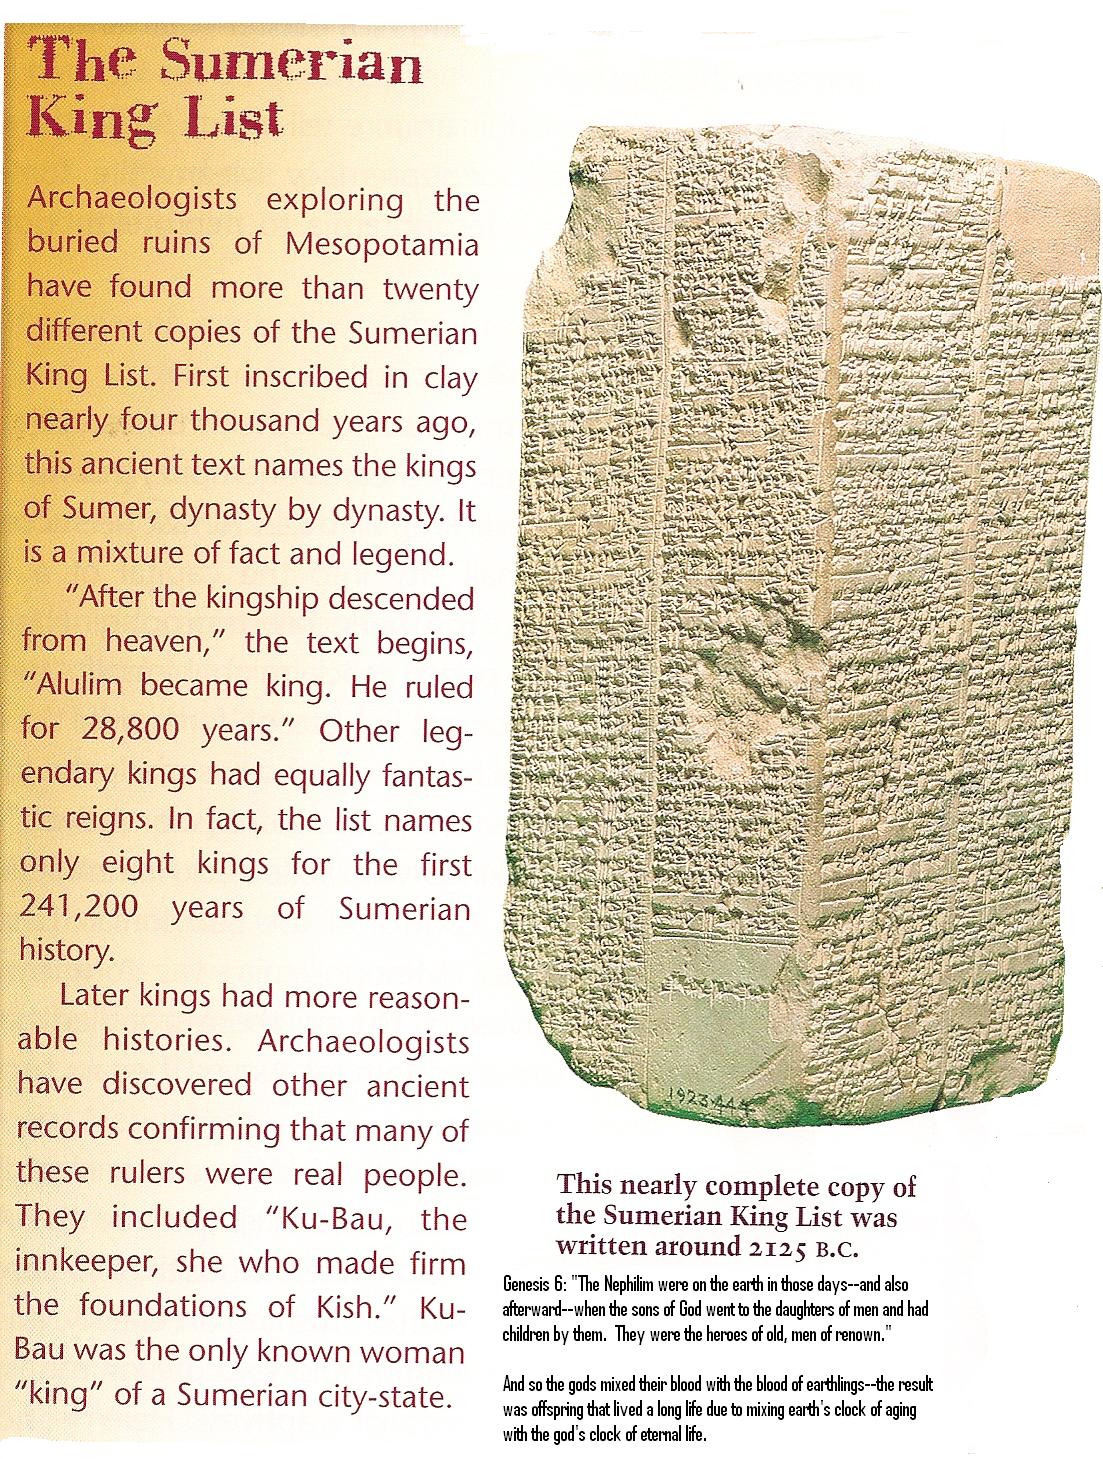 2 - Kingship re-began after the Great Flood in Kish